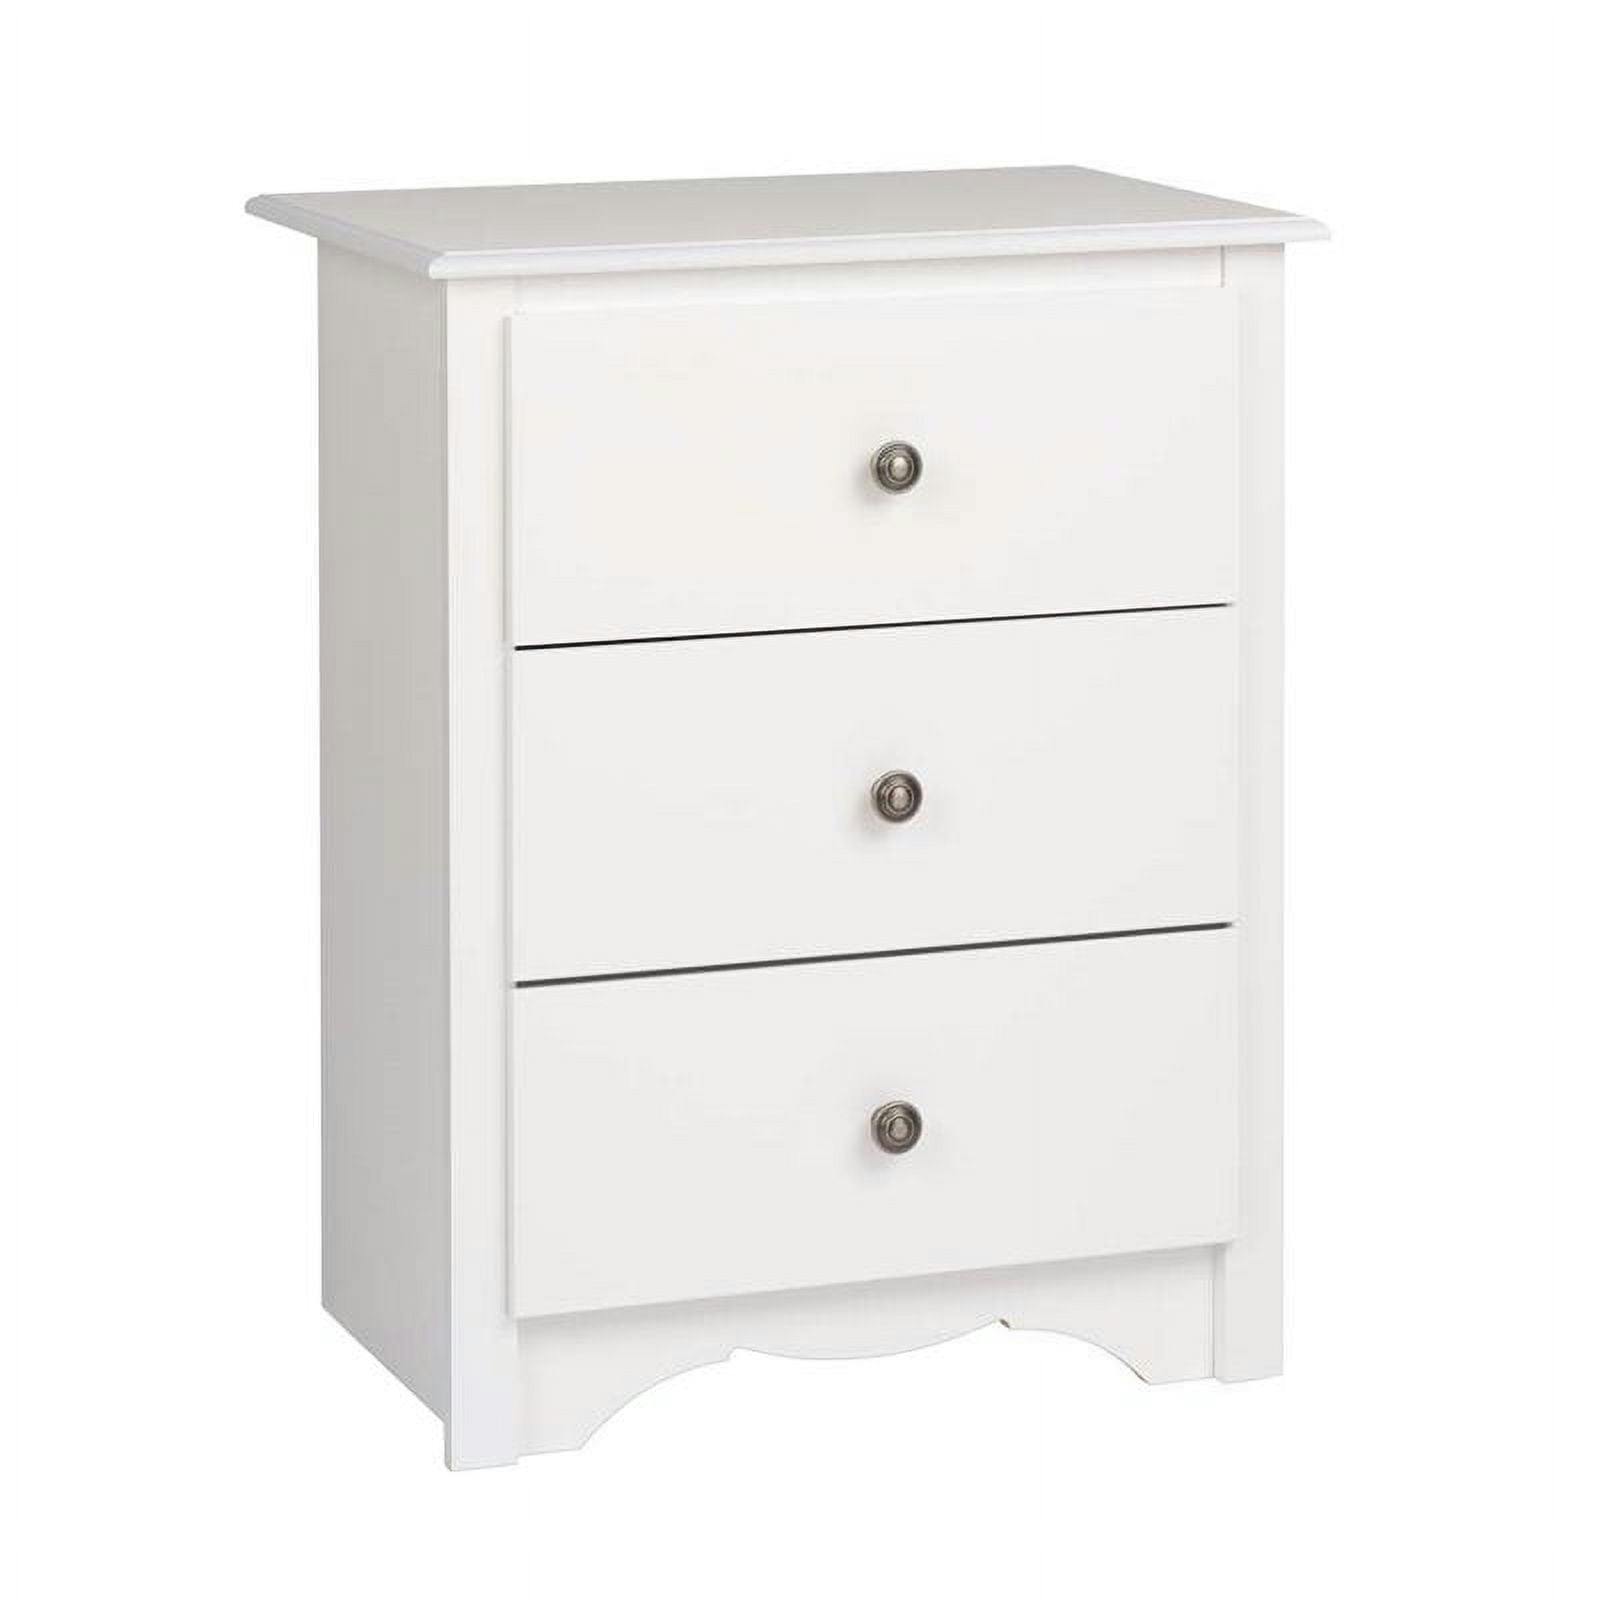 Monterey White 3-Drawer Nightstand with Pewter Knobs - 35.5"